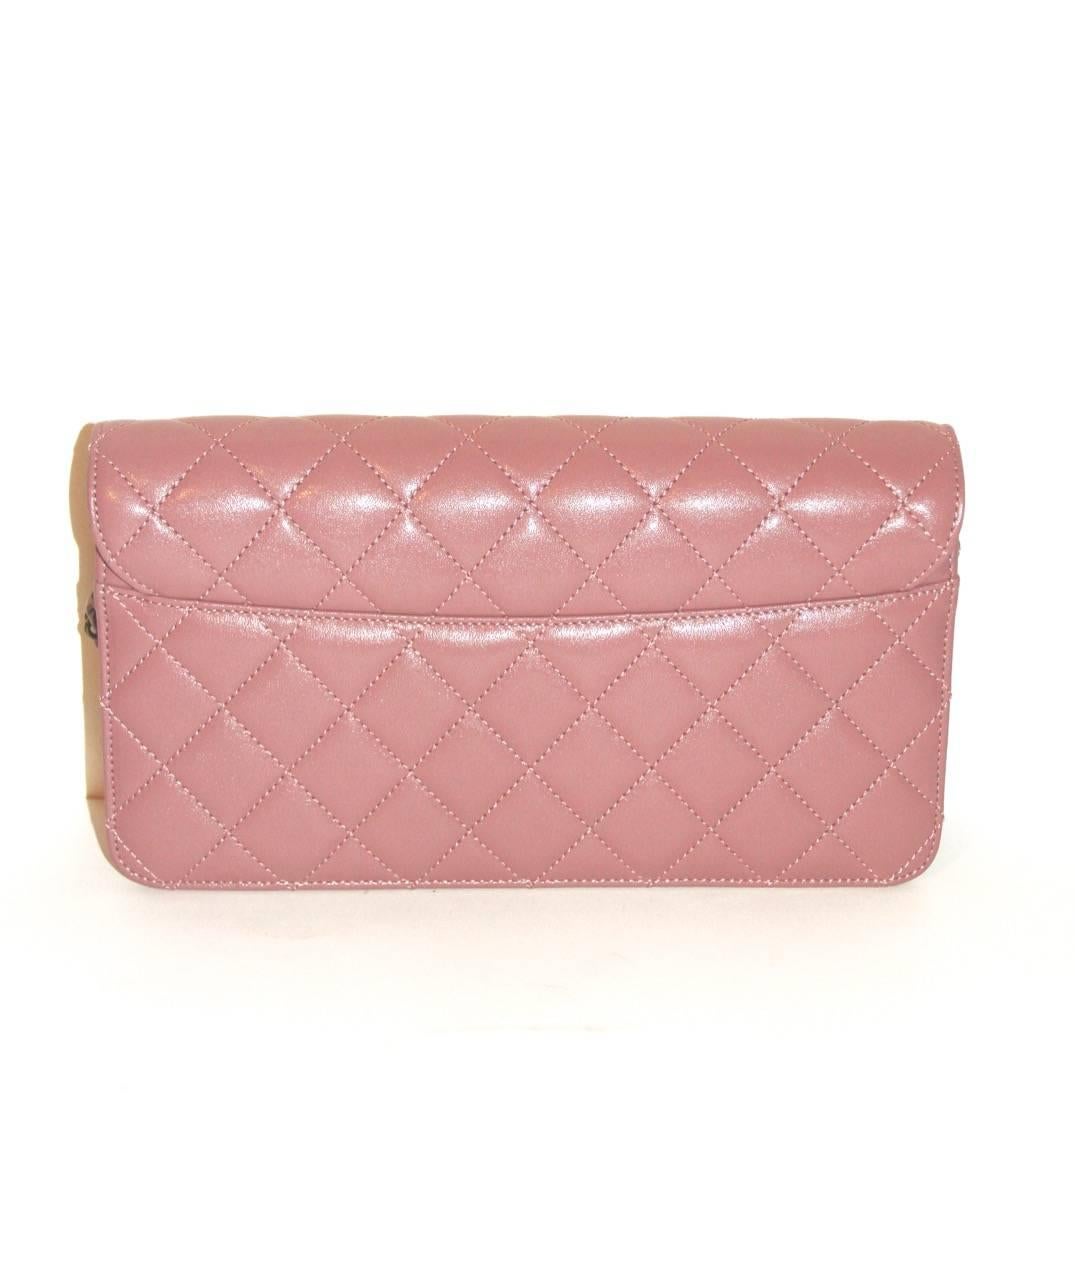 Brown CHANEL Beauty Lock Collection Old Pink Sheepskin Leather Flap Bag 